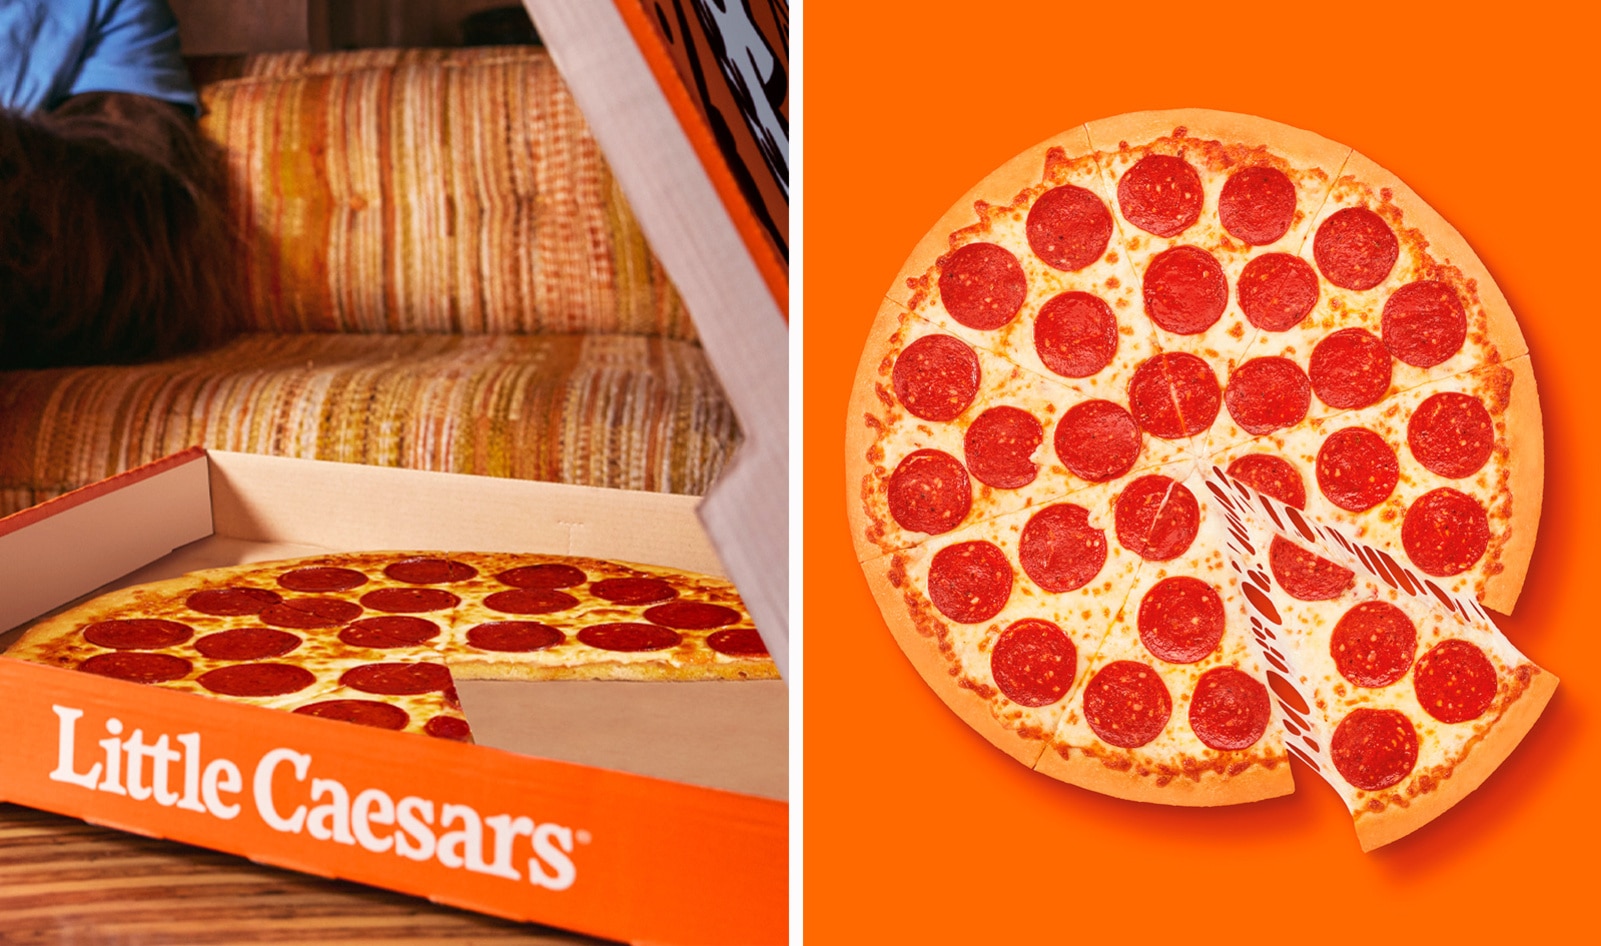 How Big is a Little Caesars Pizza
